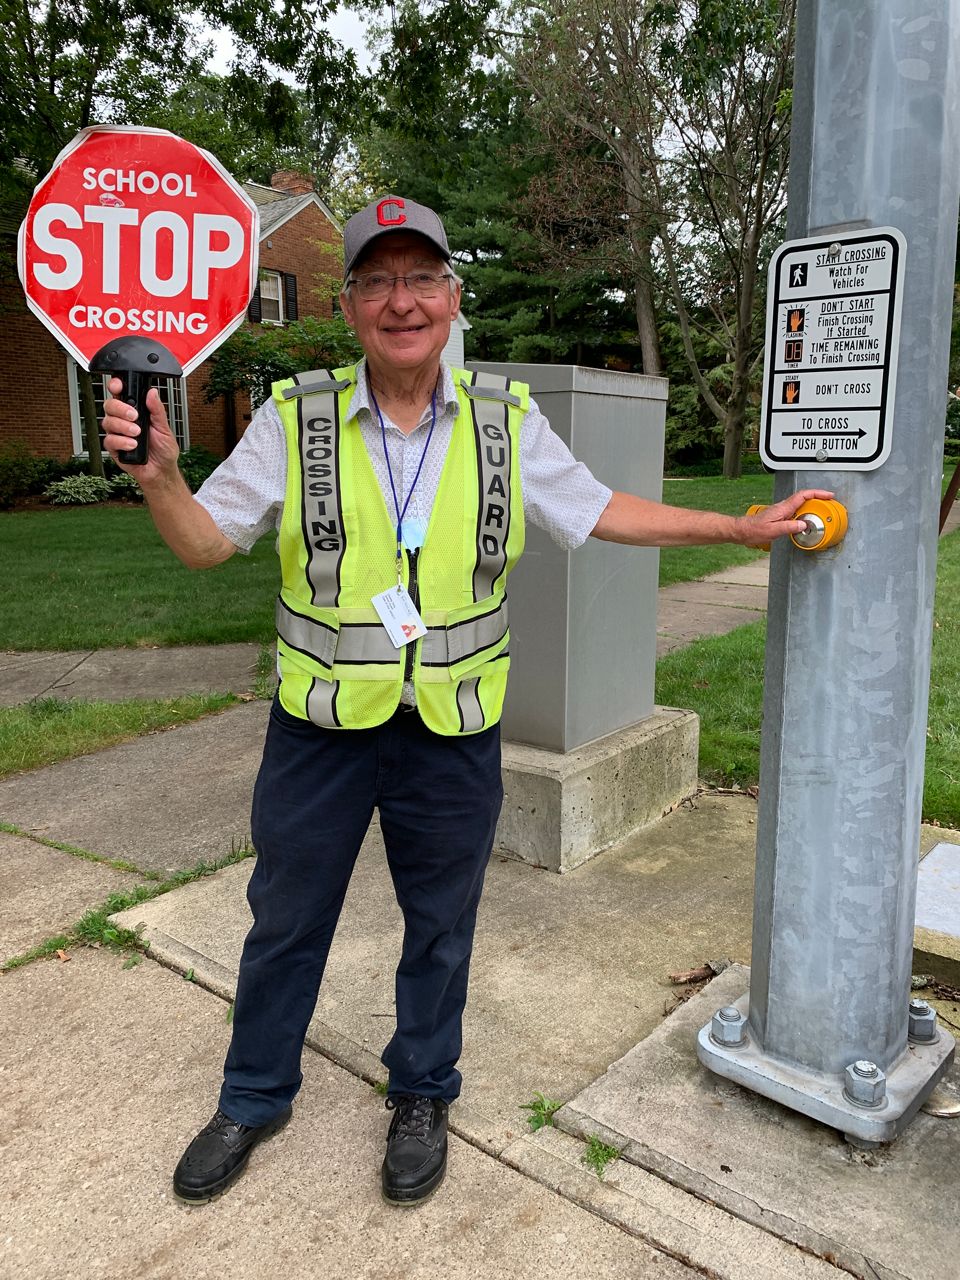 Crossing guard helps kids stay safe, they help him in return